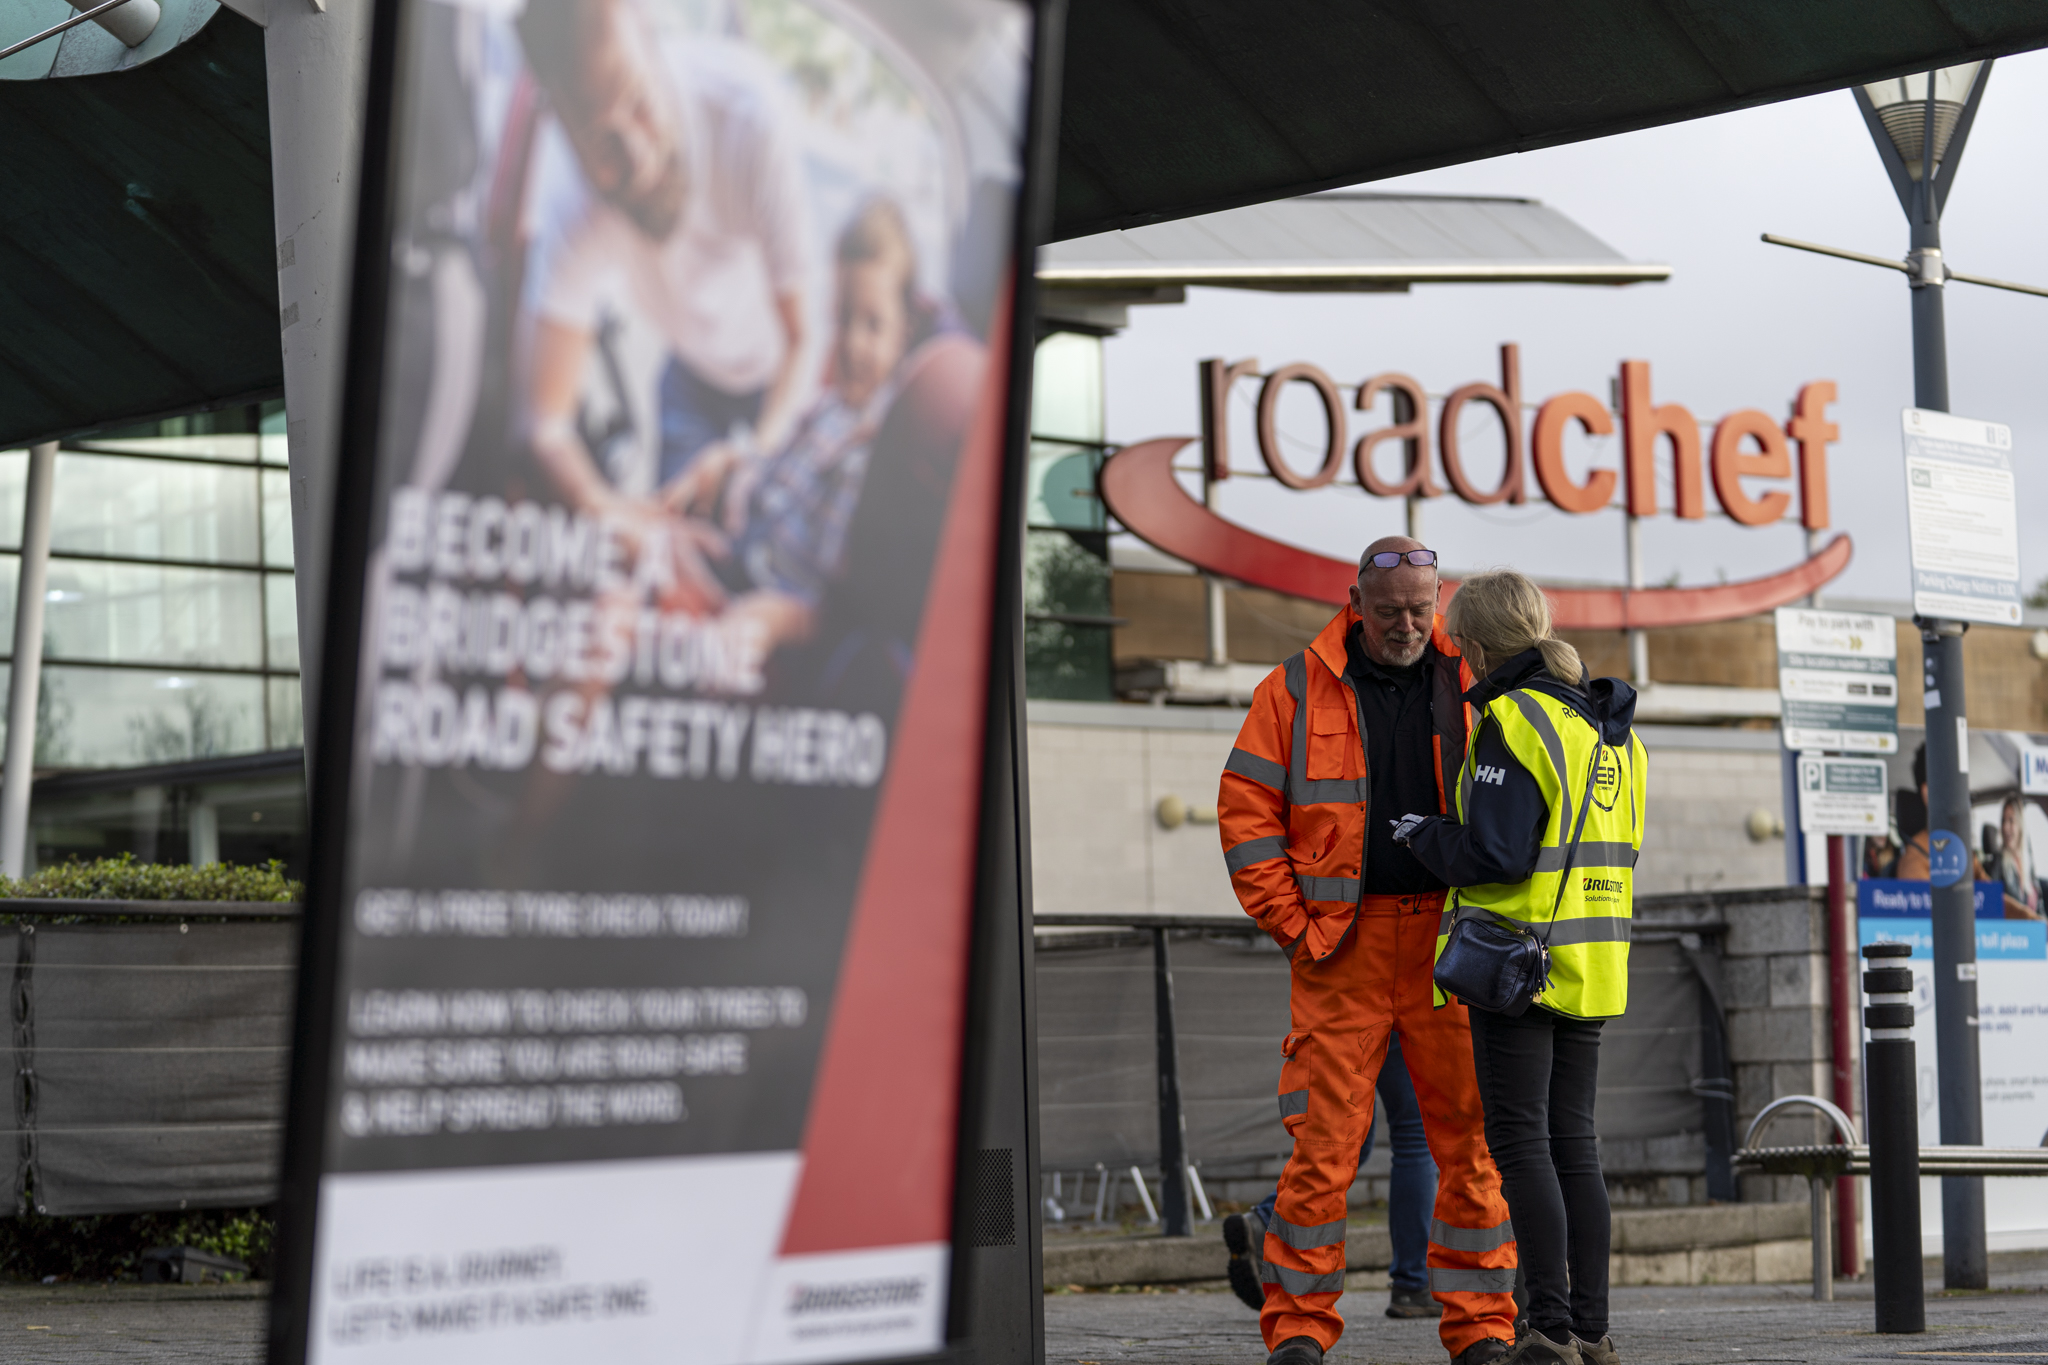 Hundreds of drivers ‘Become a Road Safety Hero’ with Bridgestone